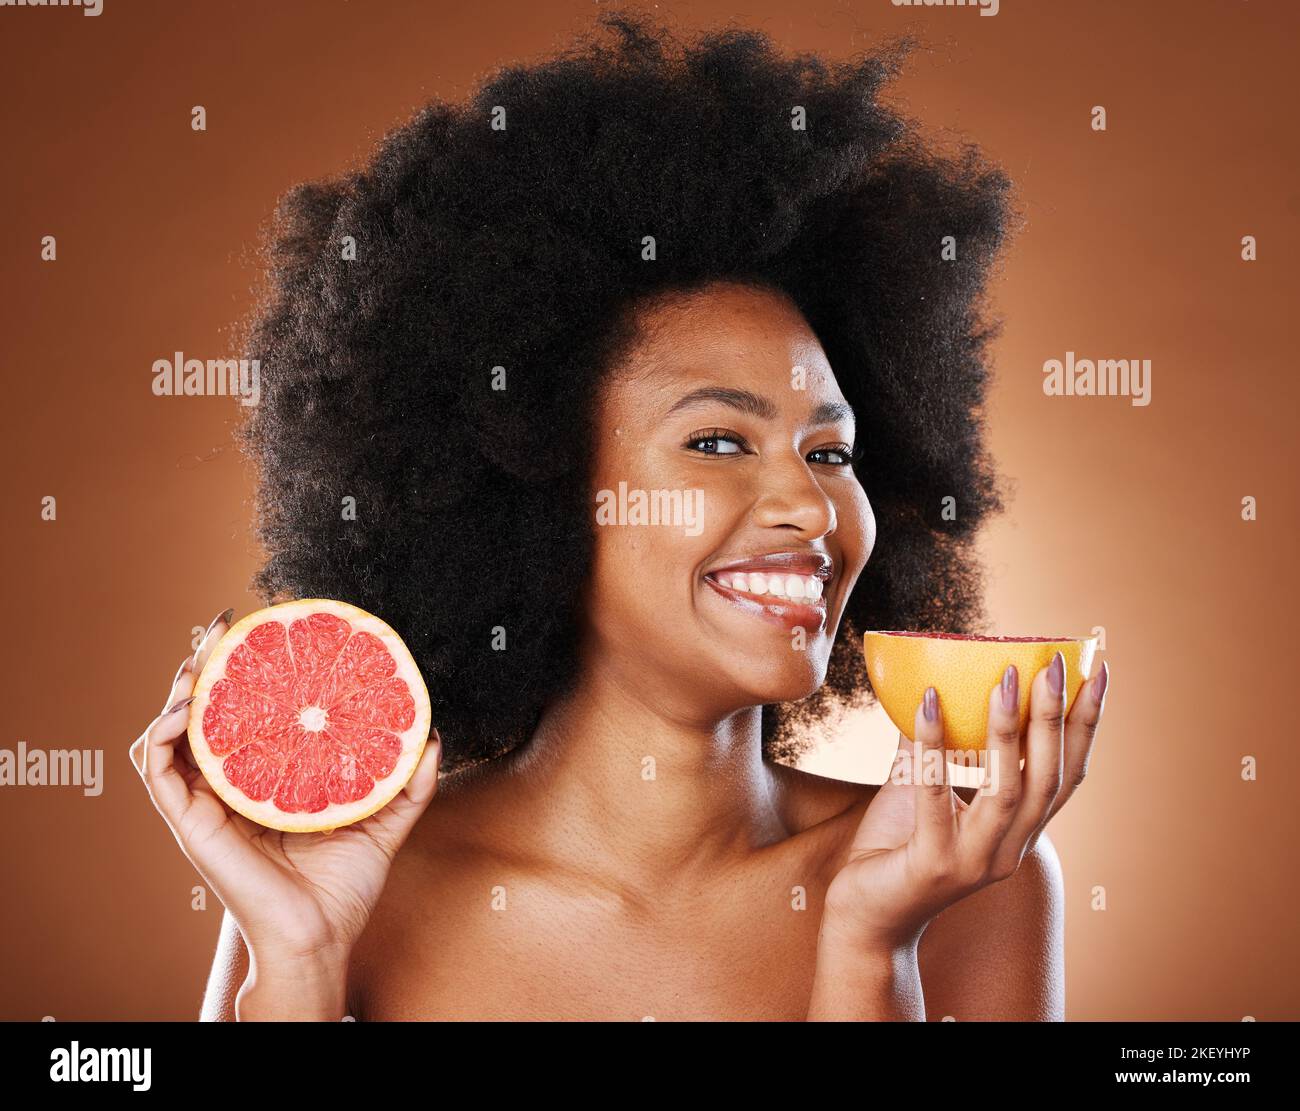 Beauty, skincare and grapefruit with portrait of black woman for vitamin c, nutrition and health. Wellness, diet and citrus product with girl model Stock Photo